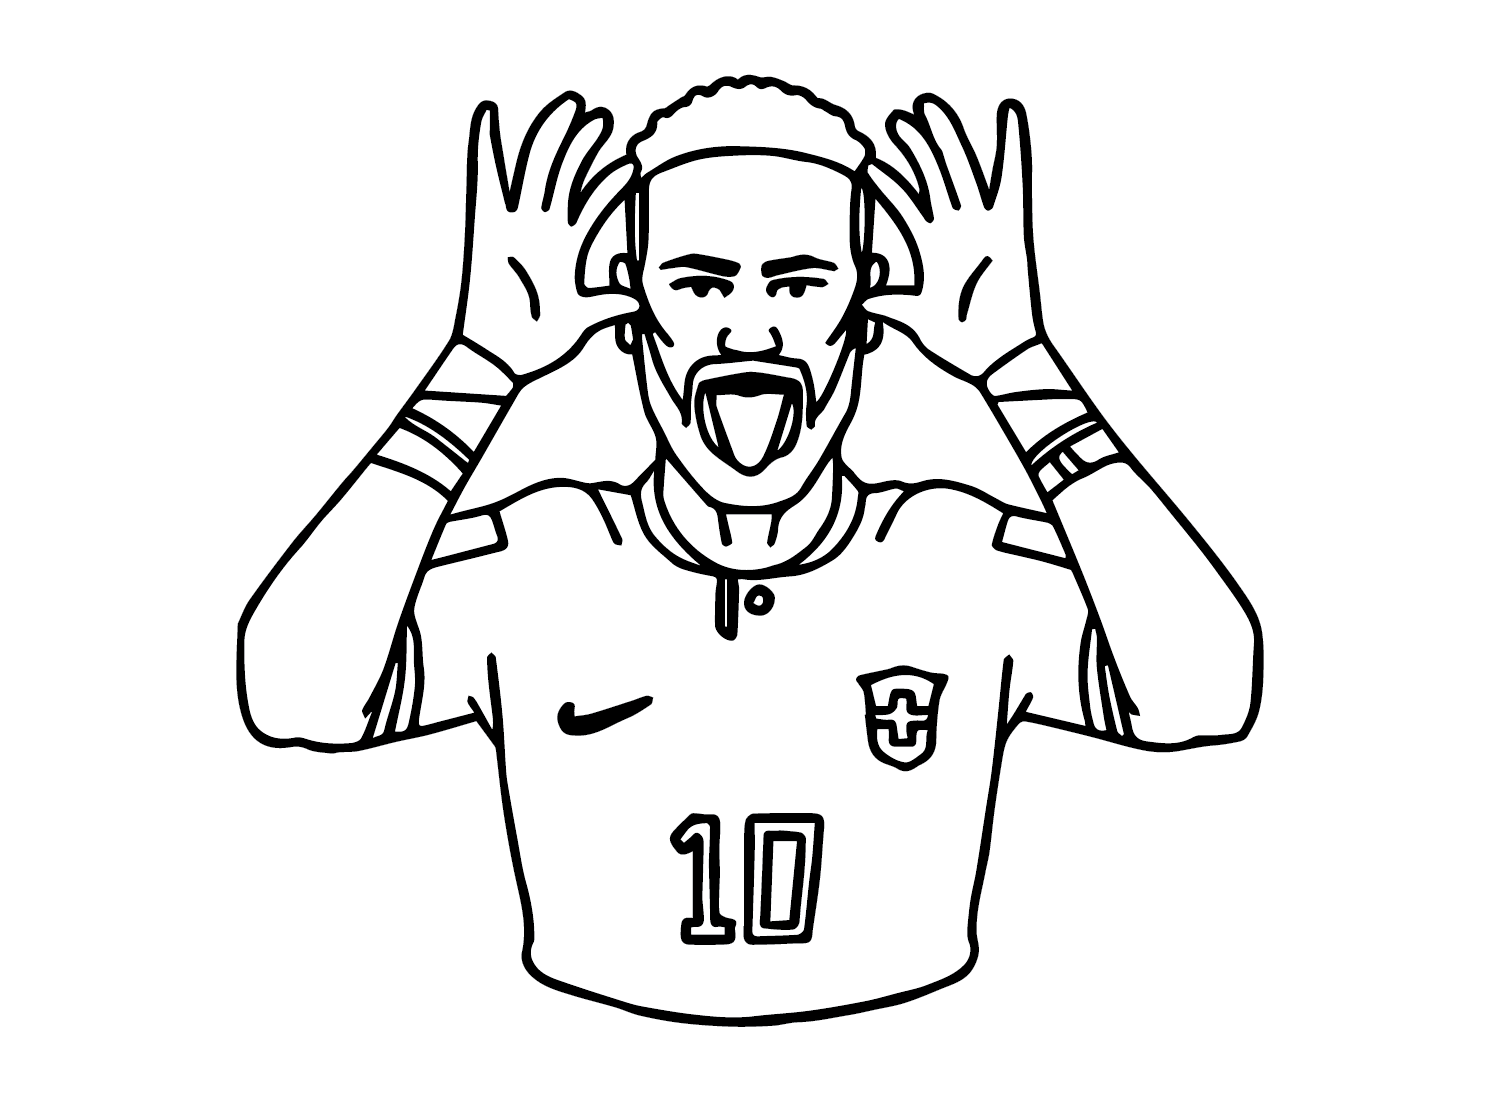 Neymar Football Player Coloring Pages